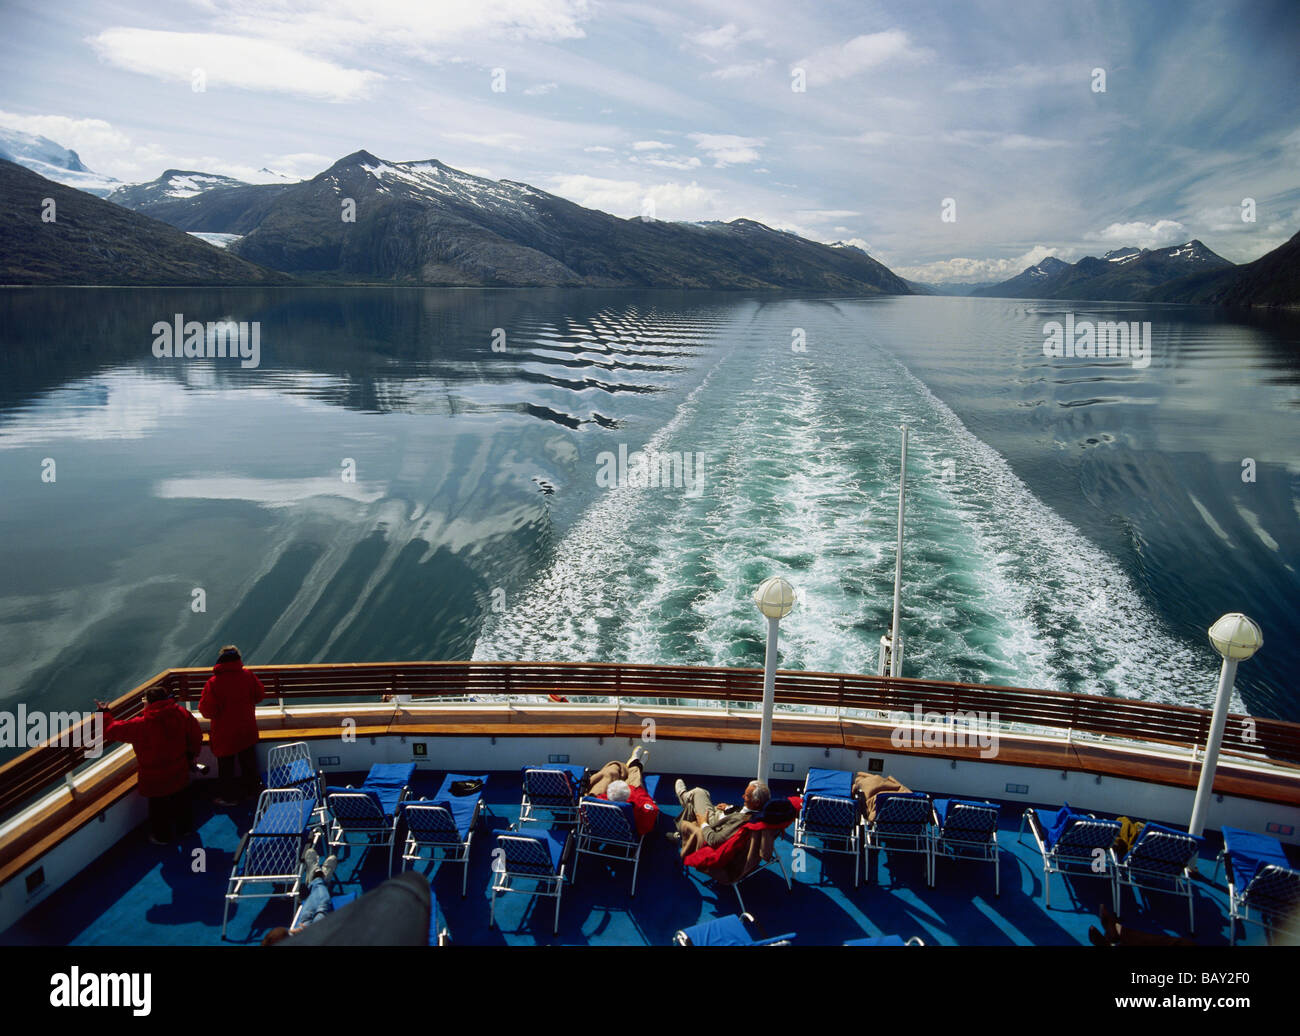 People sunbathing on a stern, Beagle Channel, South Chile, South America Stock Photo